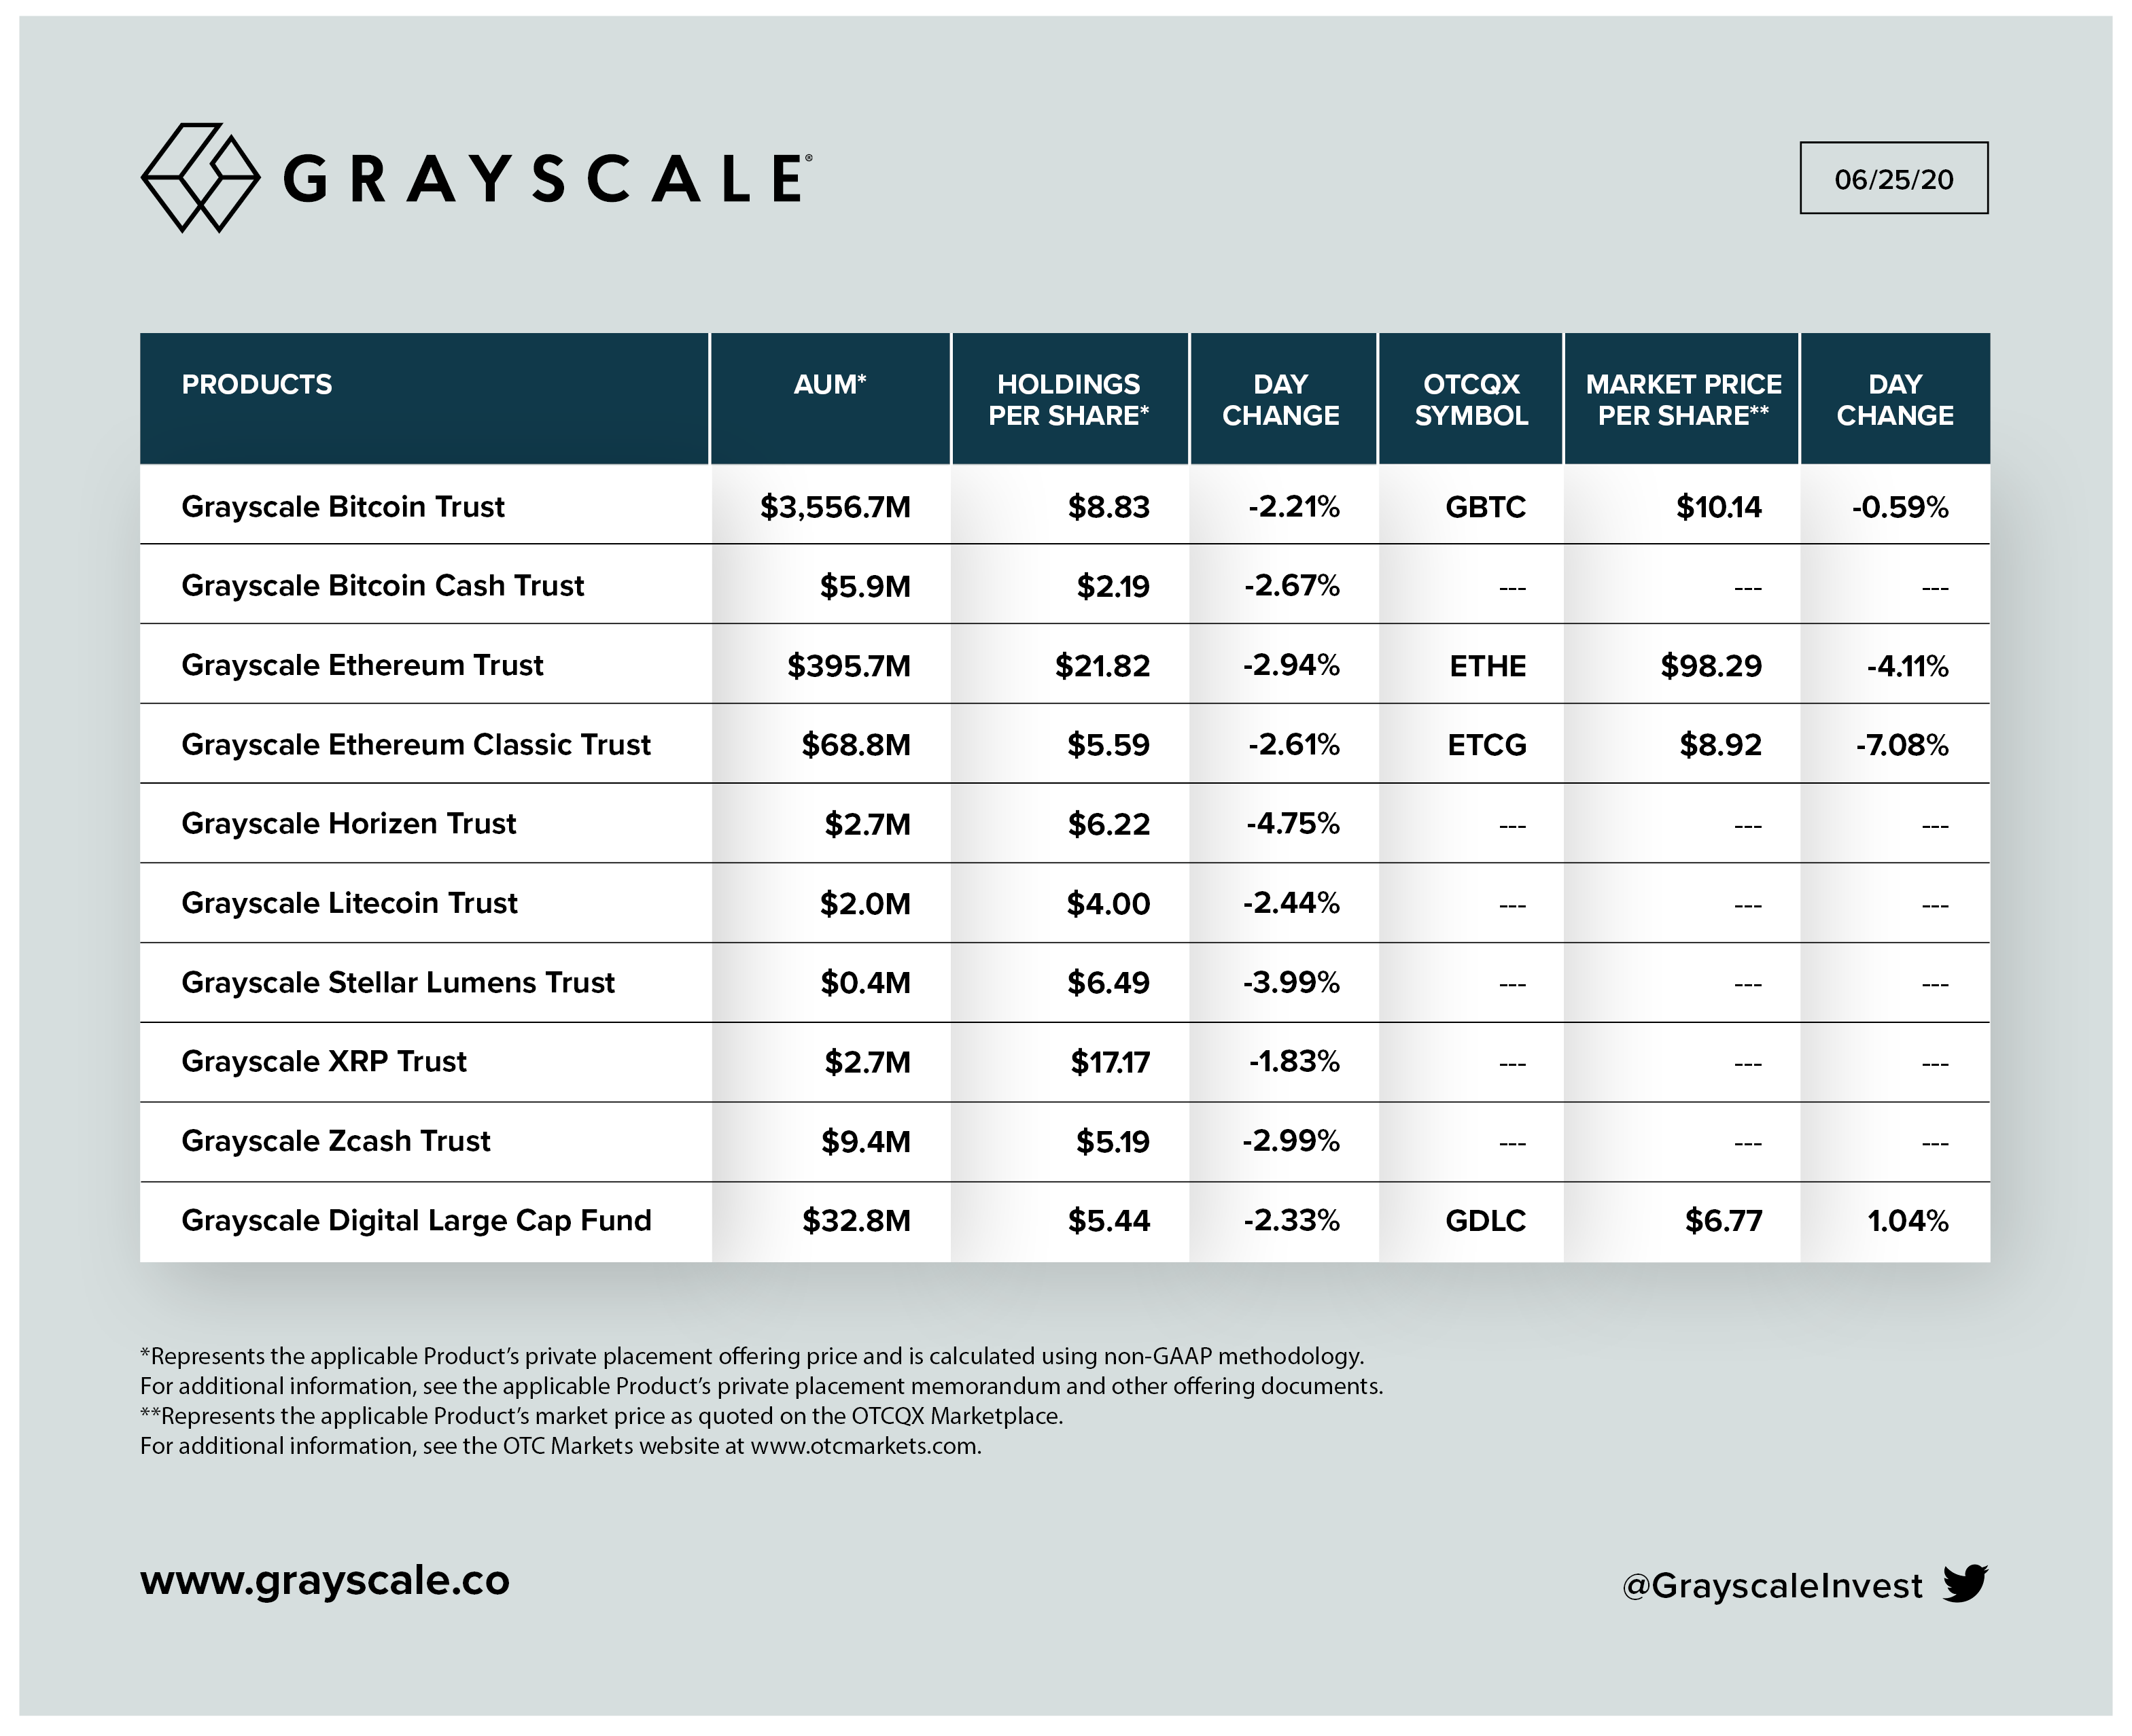 Bitcoin Investment Trust is the largest Grayscale trust